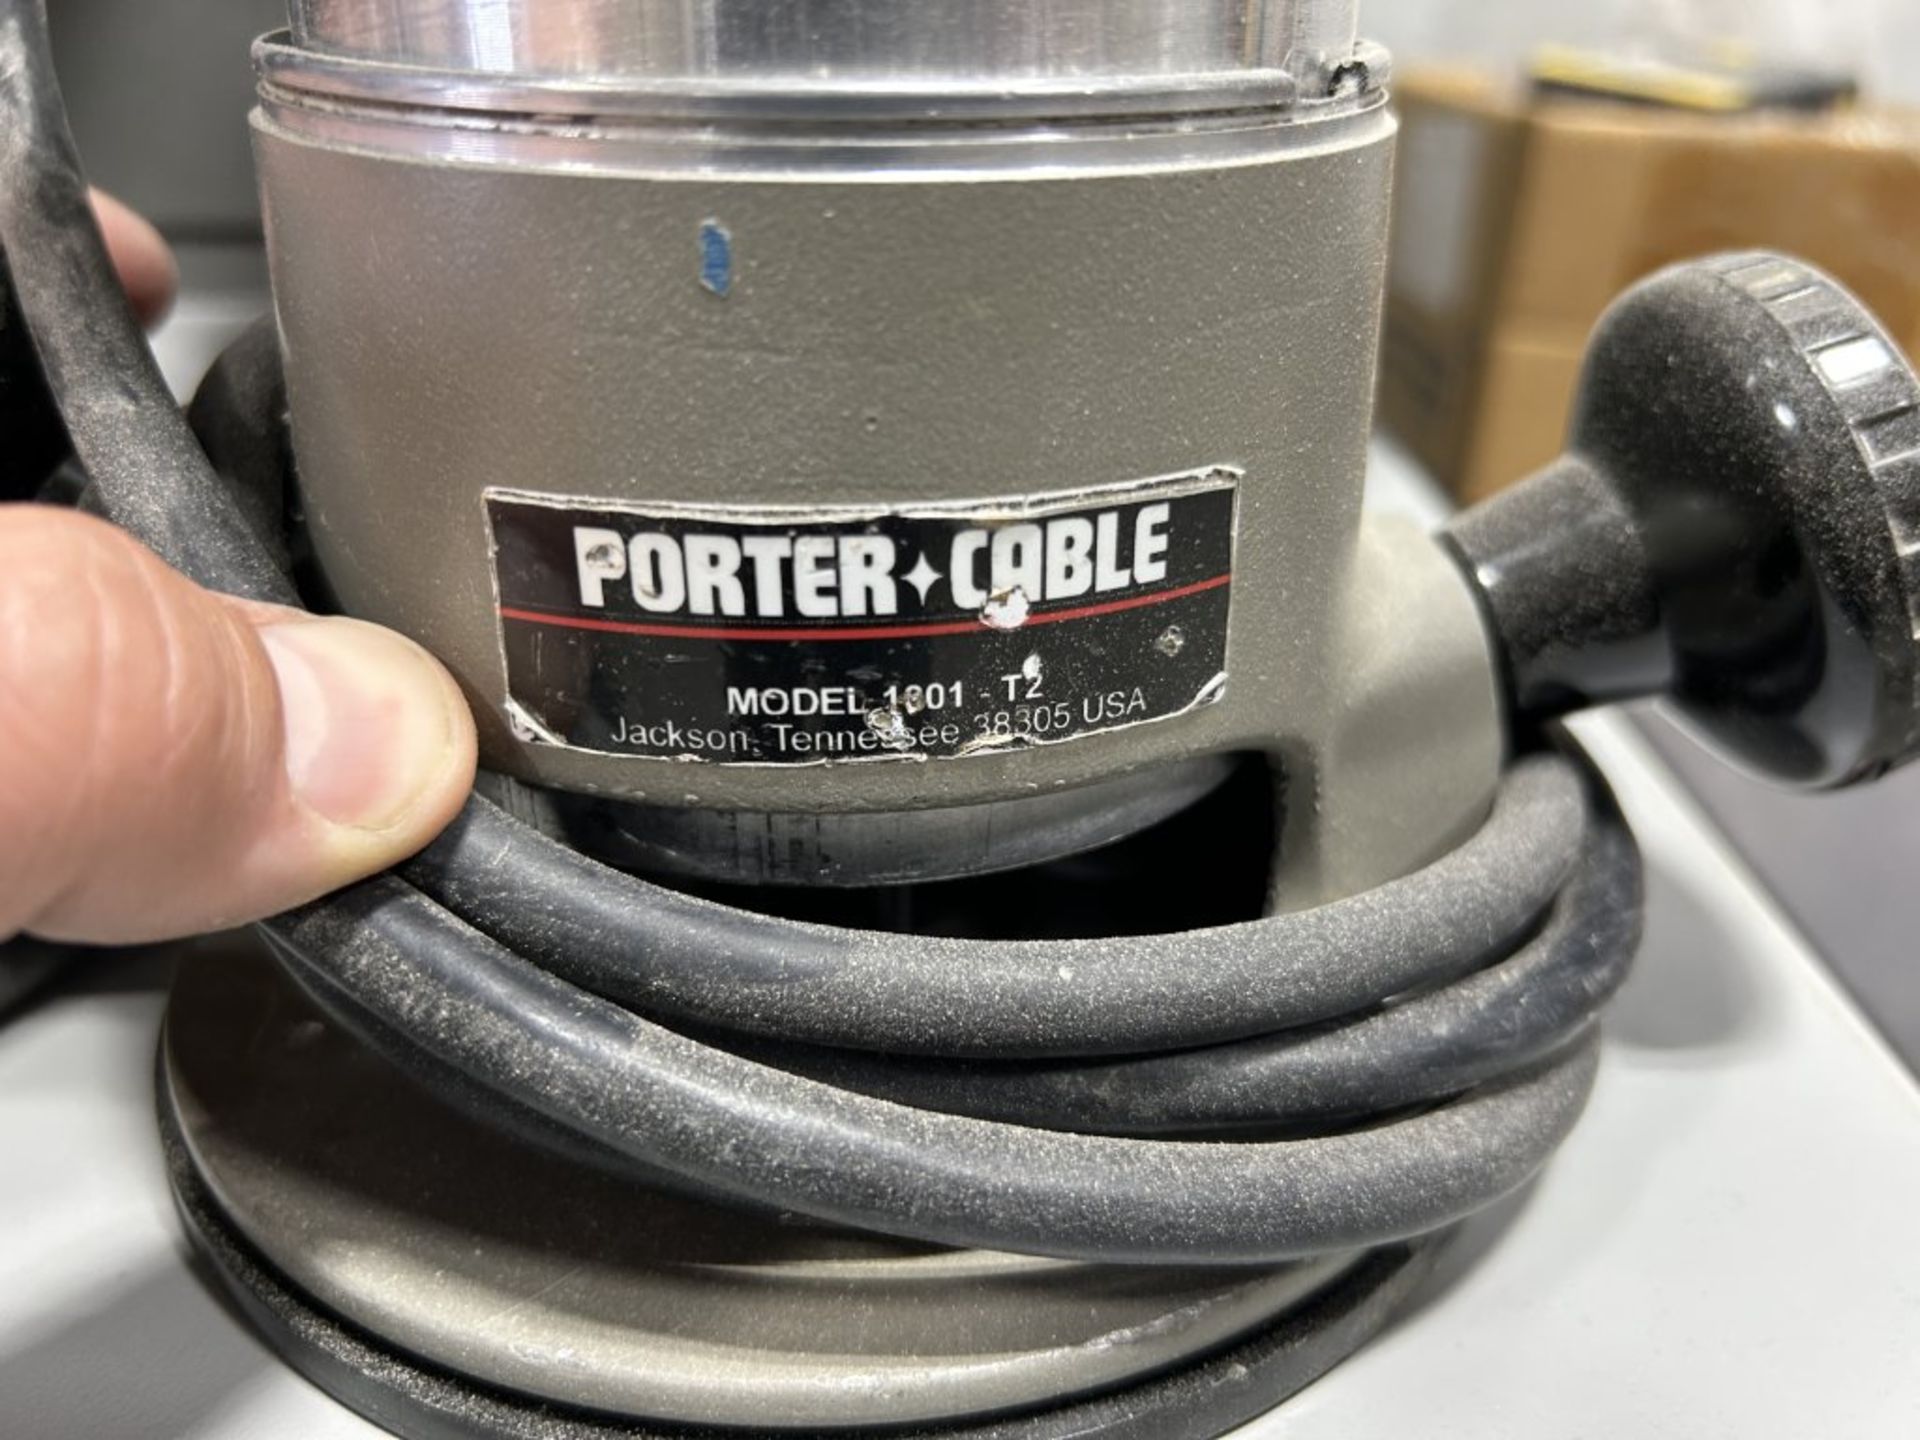 PORTER-CABLE SPEEDMATIC 7539 ROUTER AND PORTER-CABLE 690LR ROUTER - Image 7 of 8